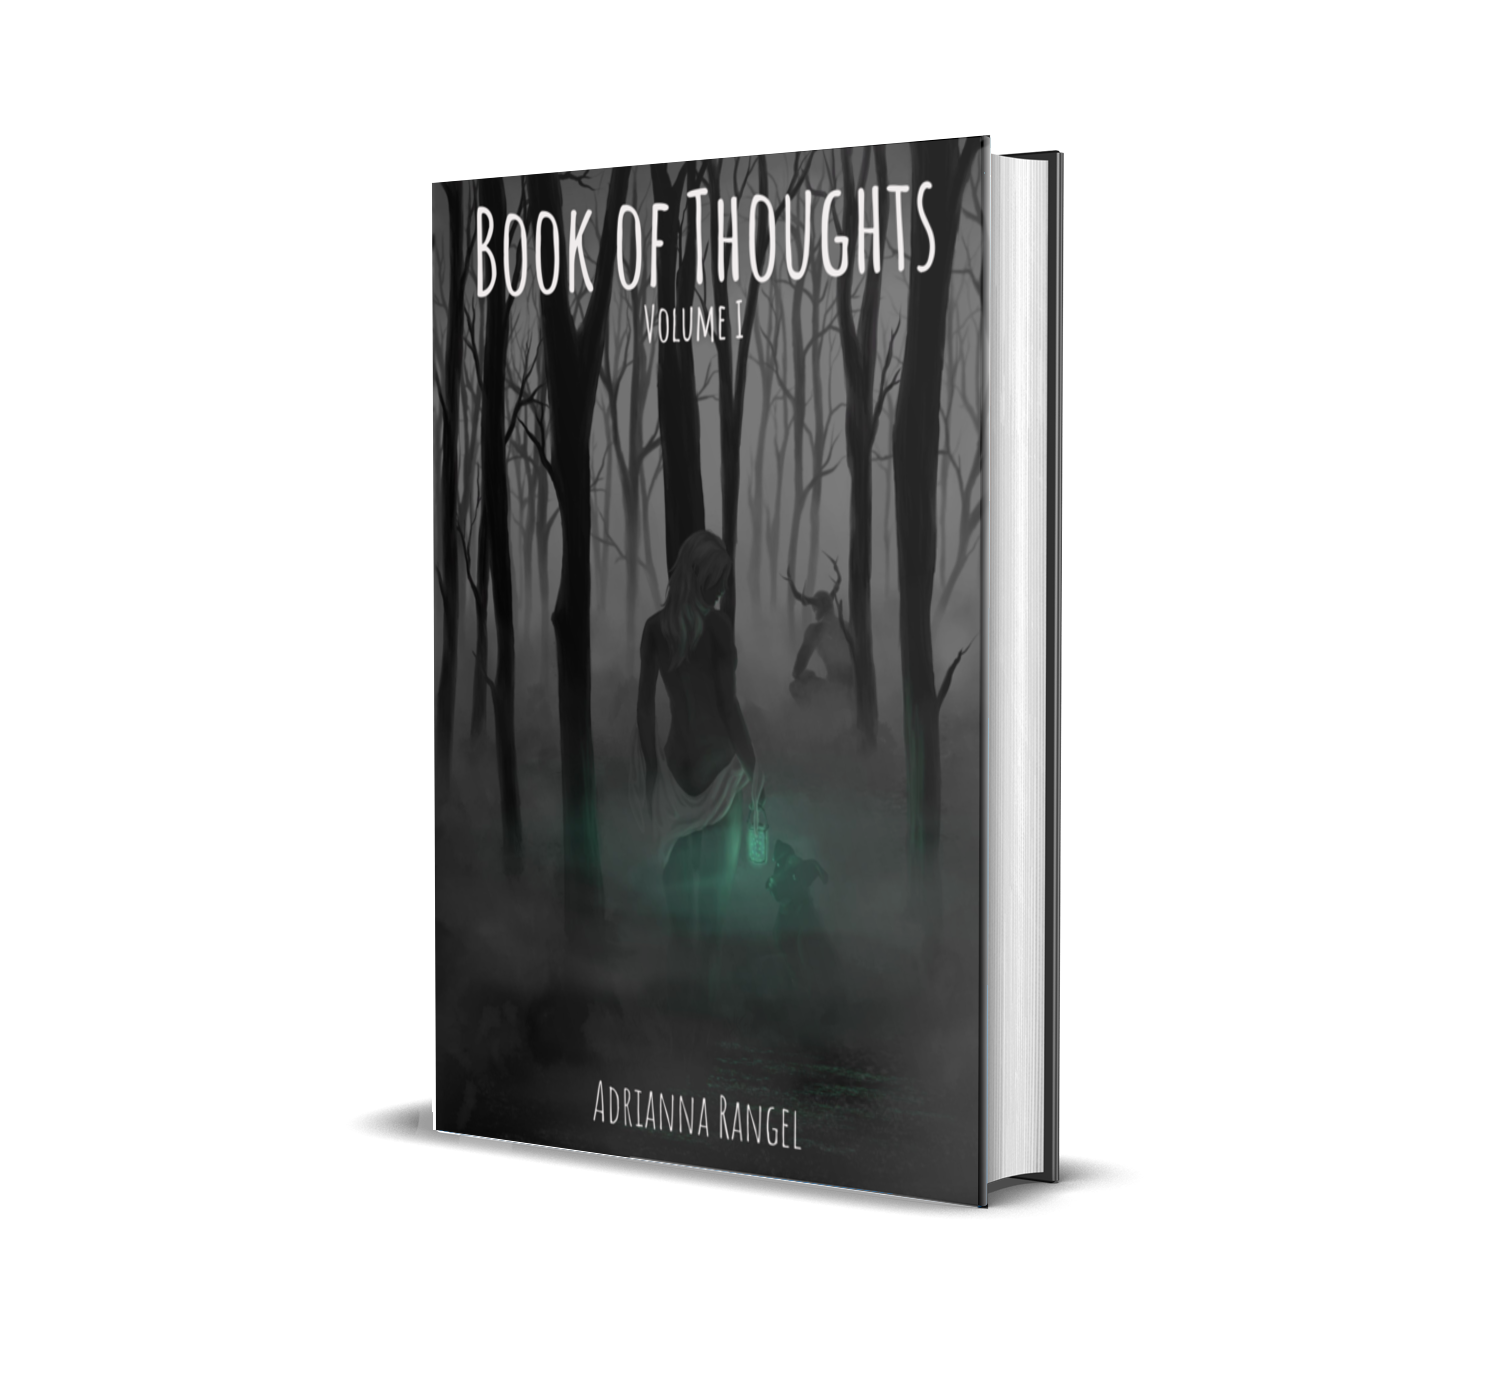 Books About BPD: "Book of Thoughts" by Adrianna Rangel (Q+A)